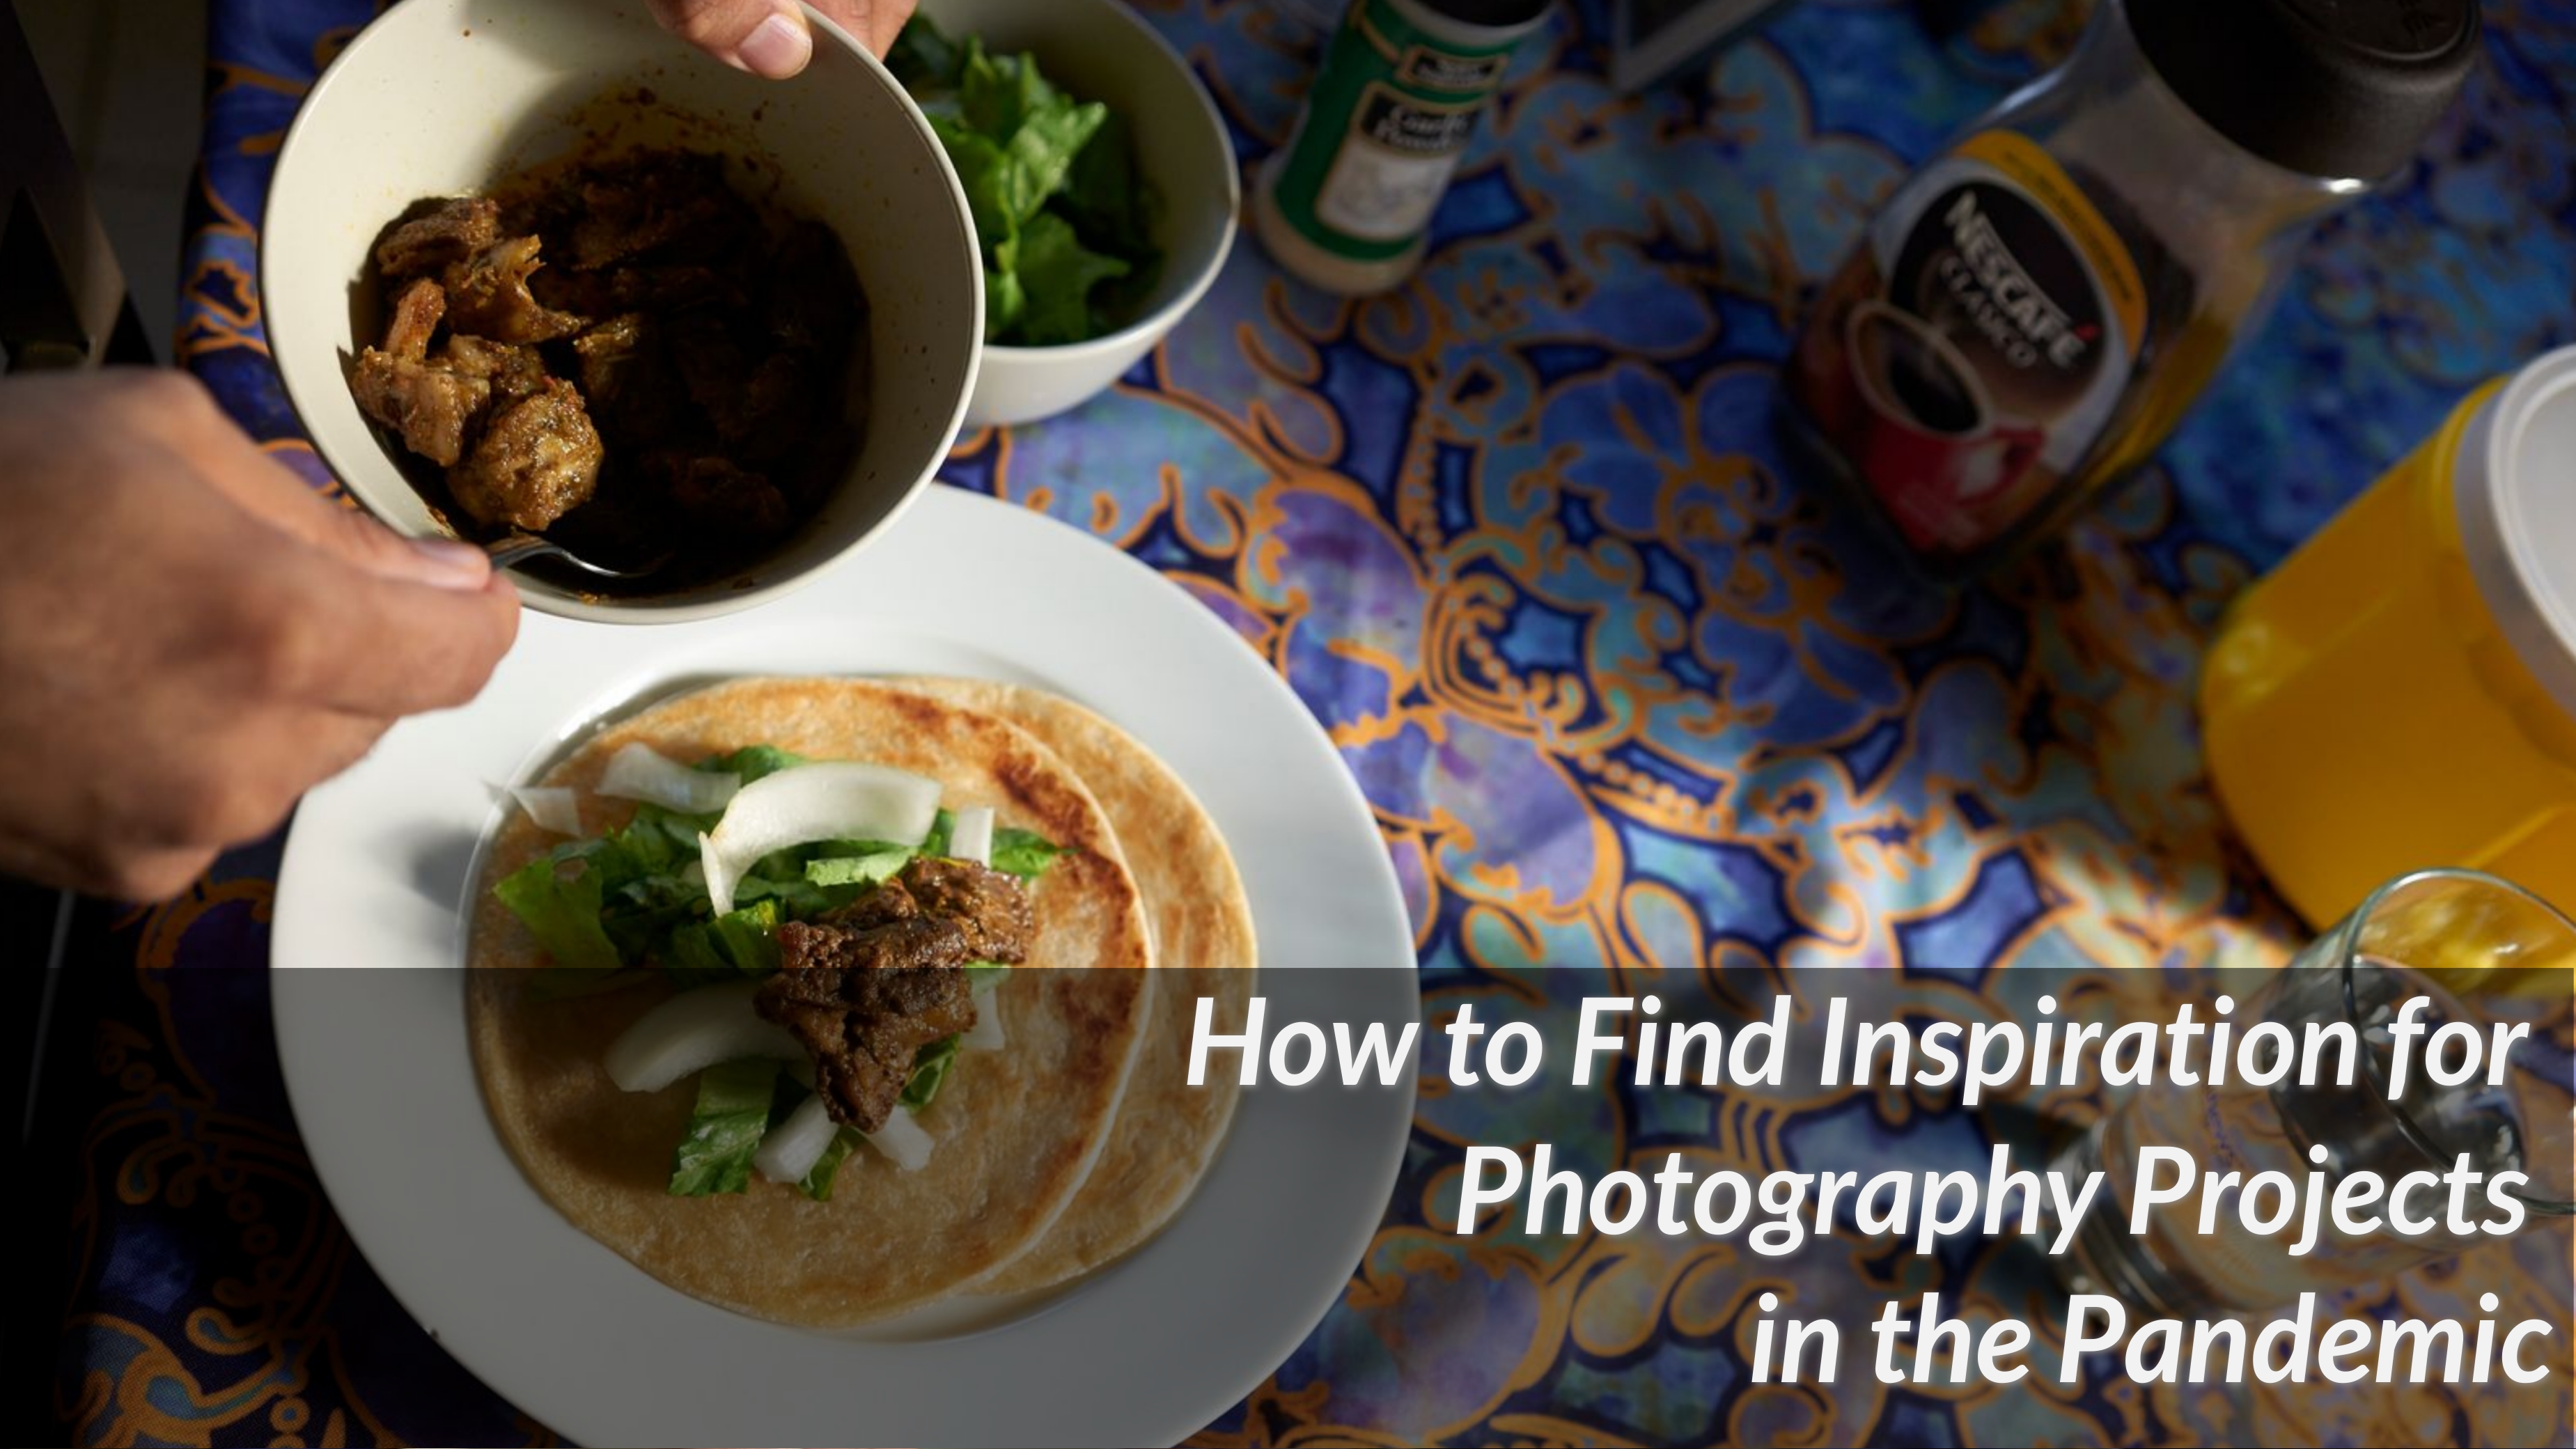 How to Find Inspiration for Photography Projects in the Pandemic